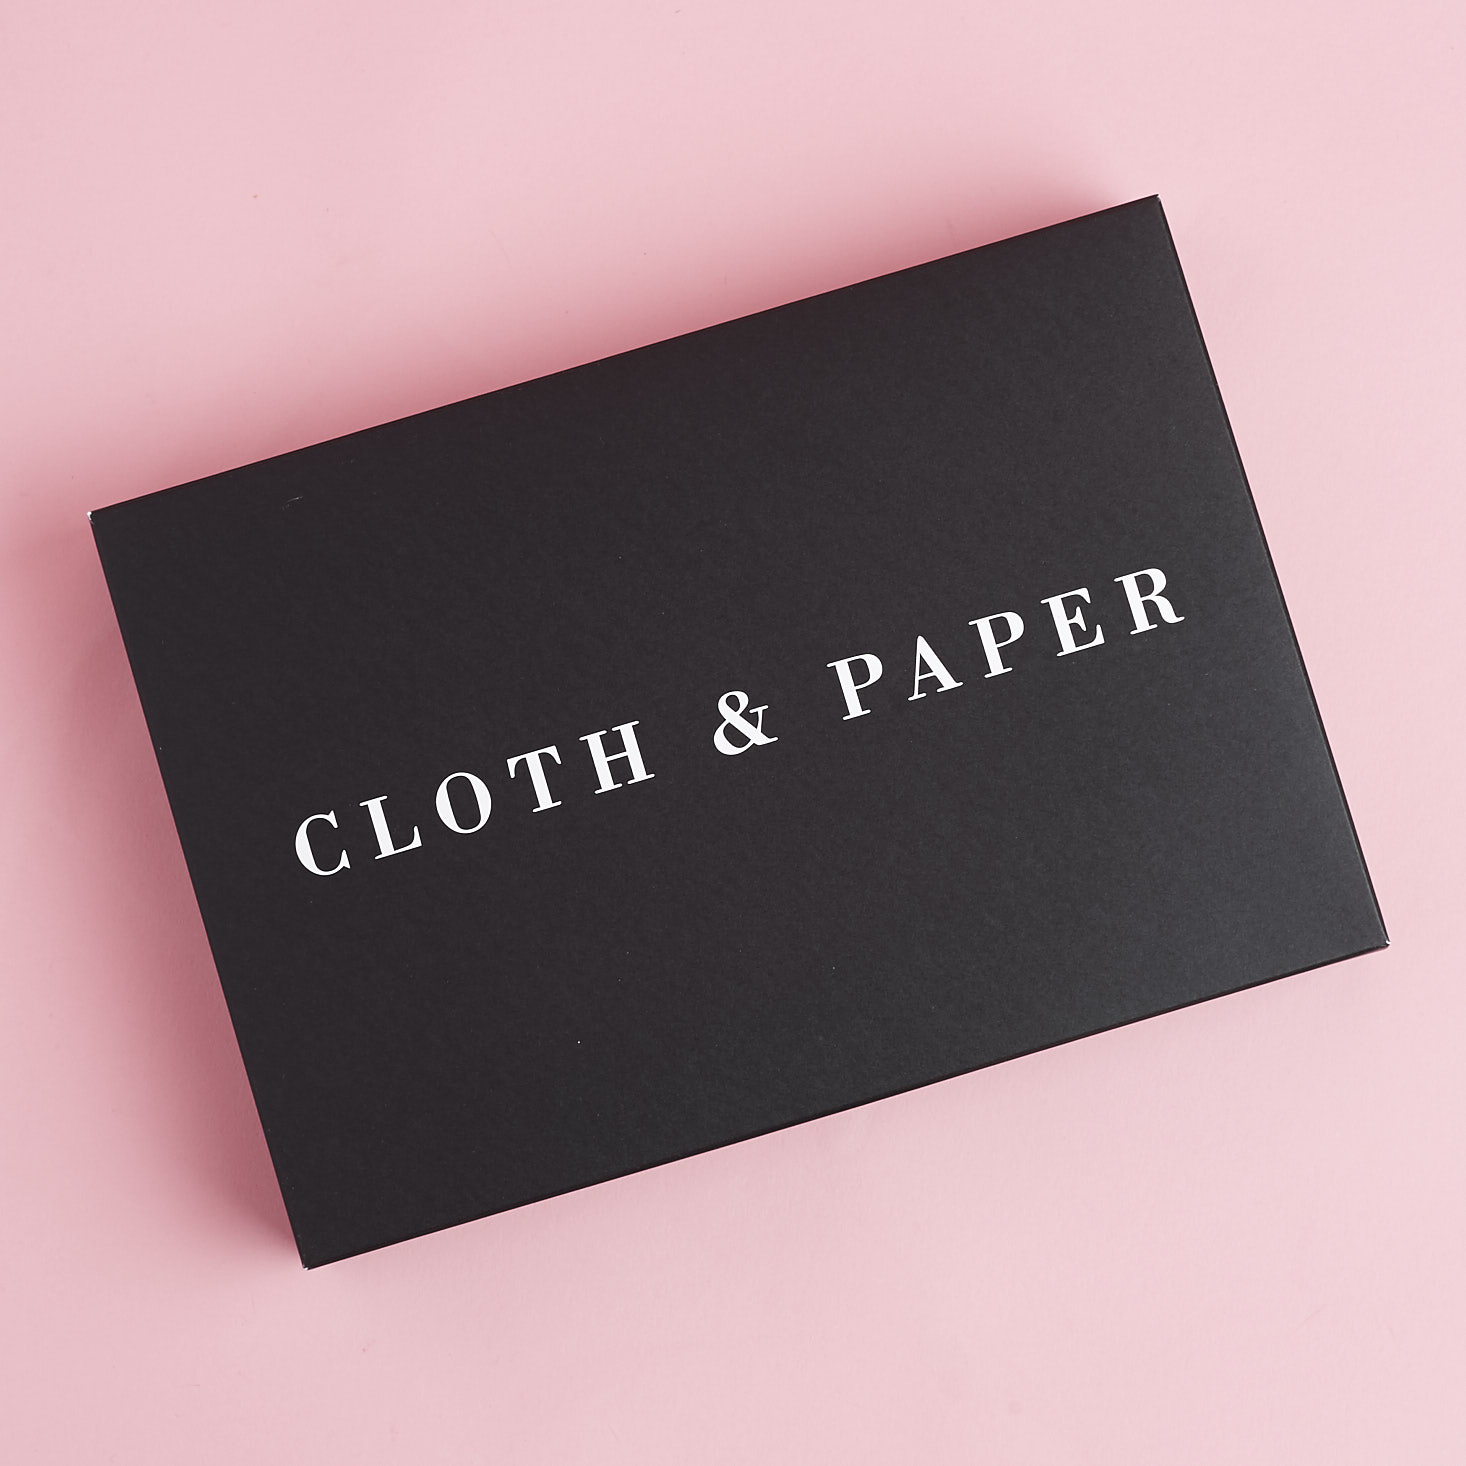 Cloth & Paper Stationery Subscription Box Review – September 2017